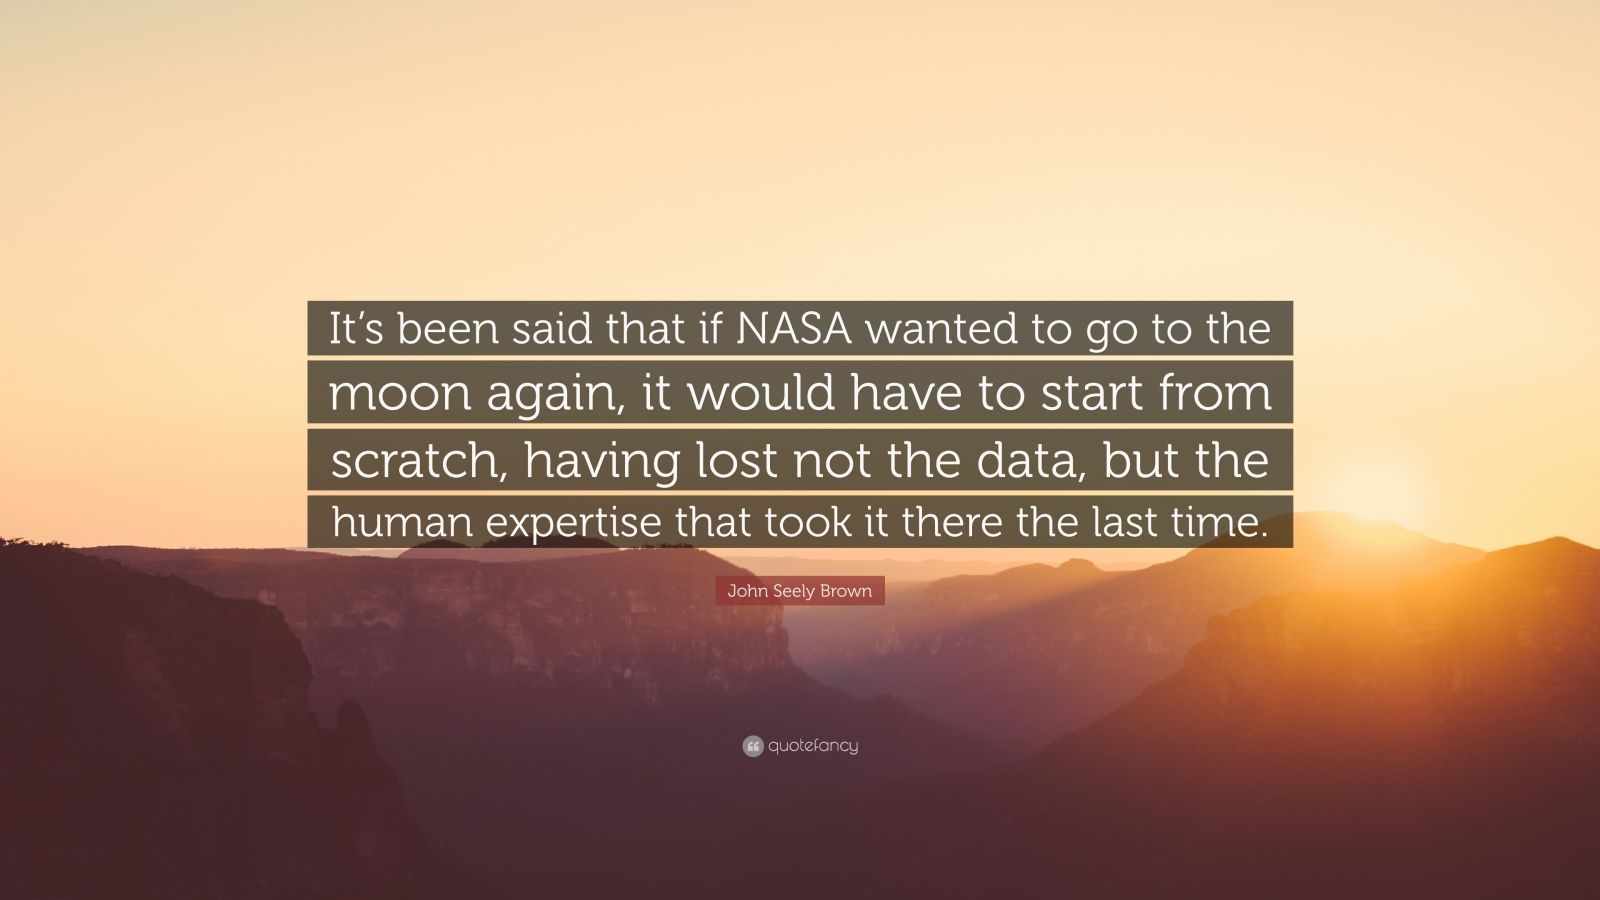 John Seely Brown Quote: “It’s been said that if NASA wanted to go to